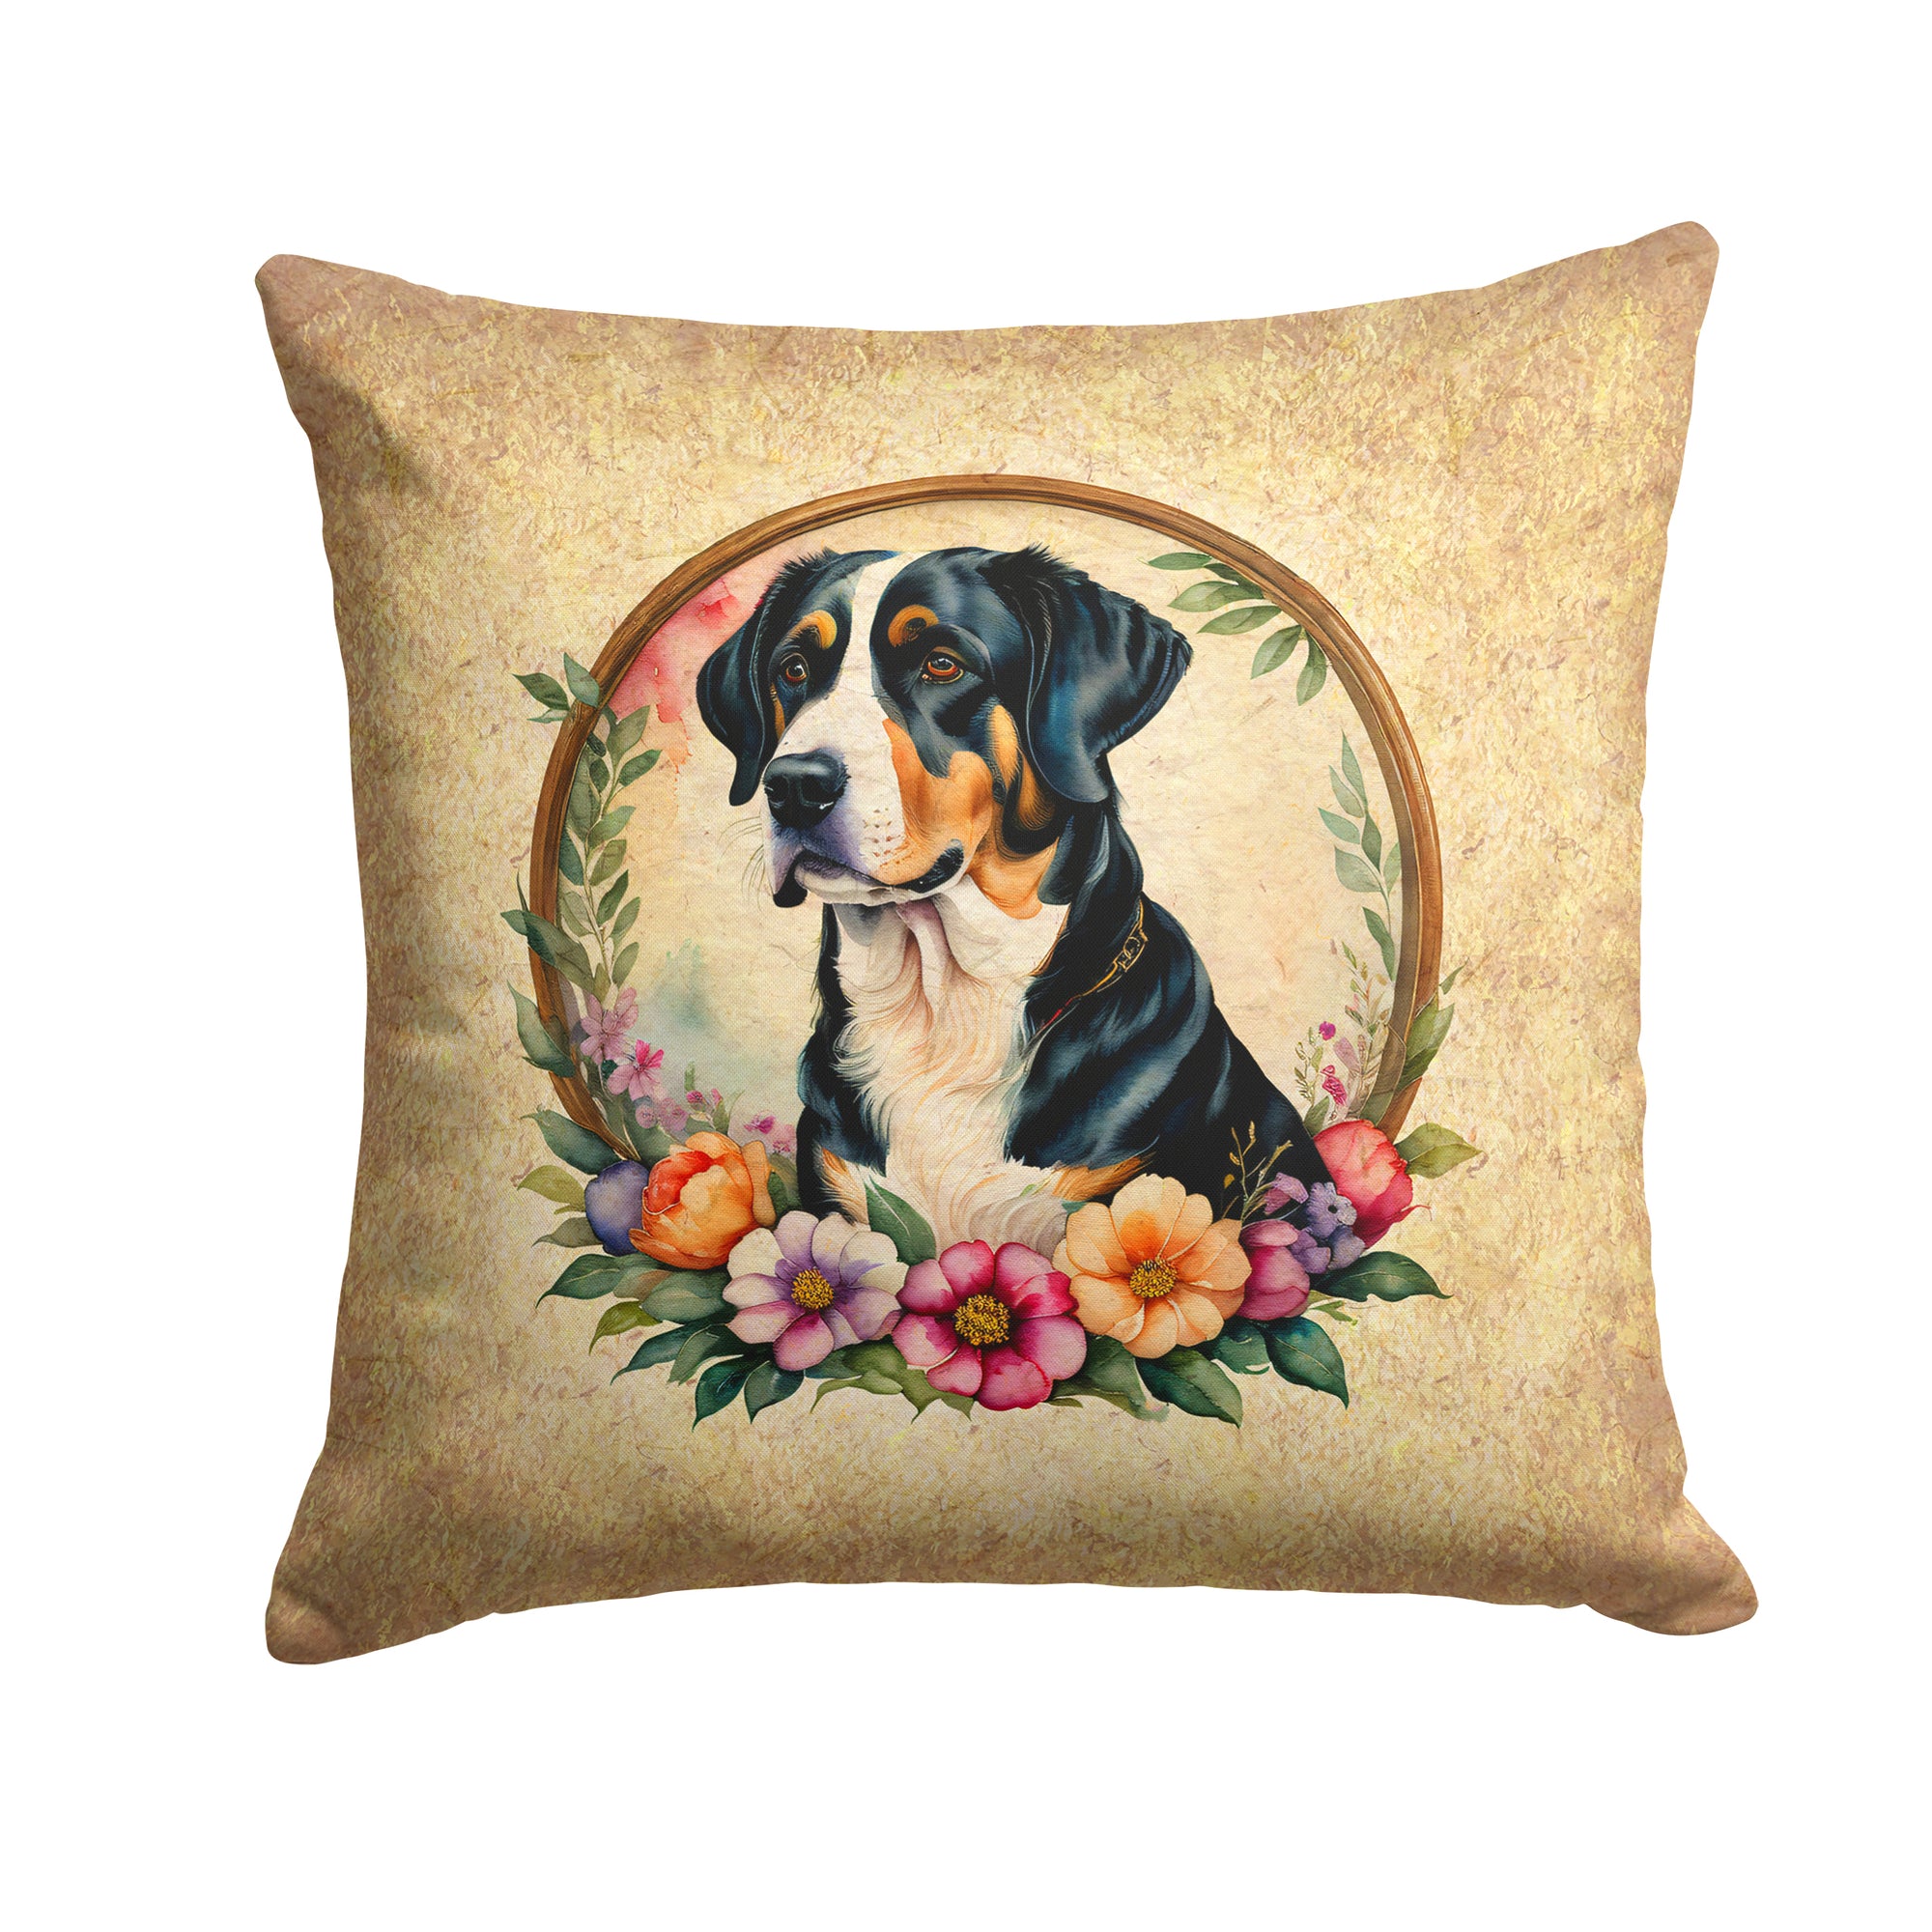 Buy this Greater Swiss Mountain Dog and Flowers Fabric Decorative Pillow